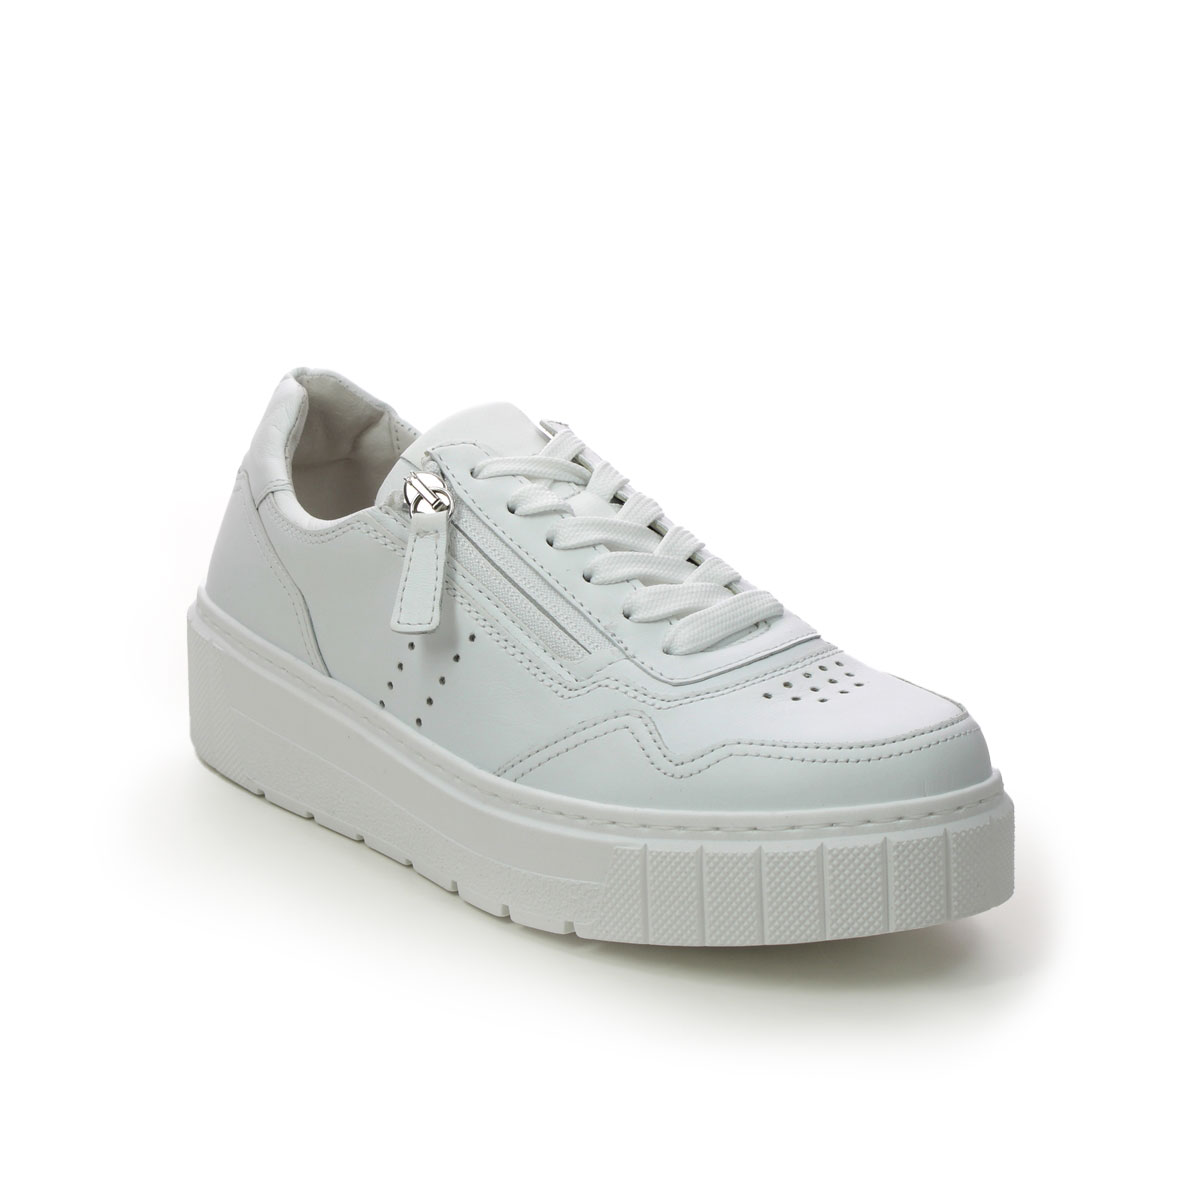 Gabor Farica Zip White Leather Womens Trainers 26.418.50 In Size 4.5 In Plain White Leather  Womens Trainers In Soft White Leather Leather